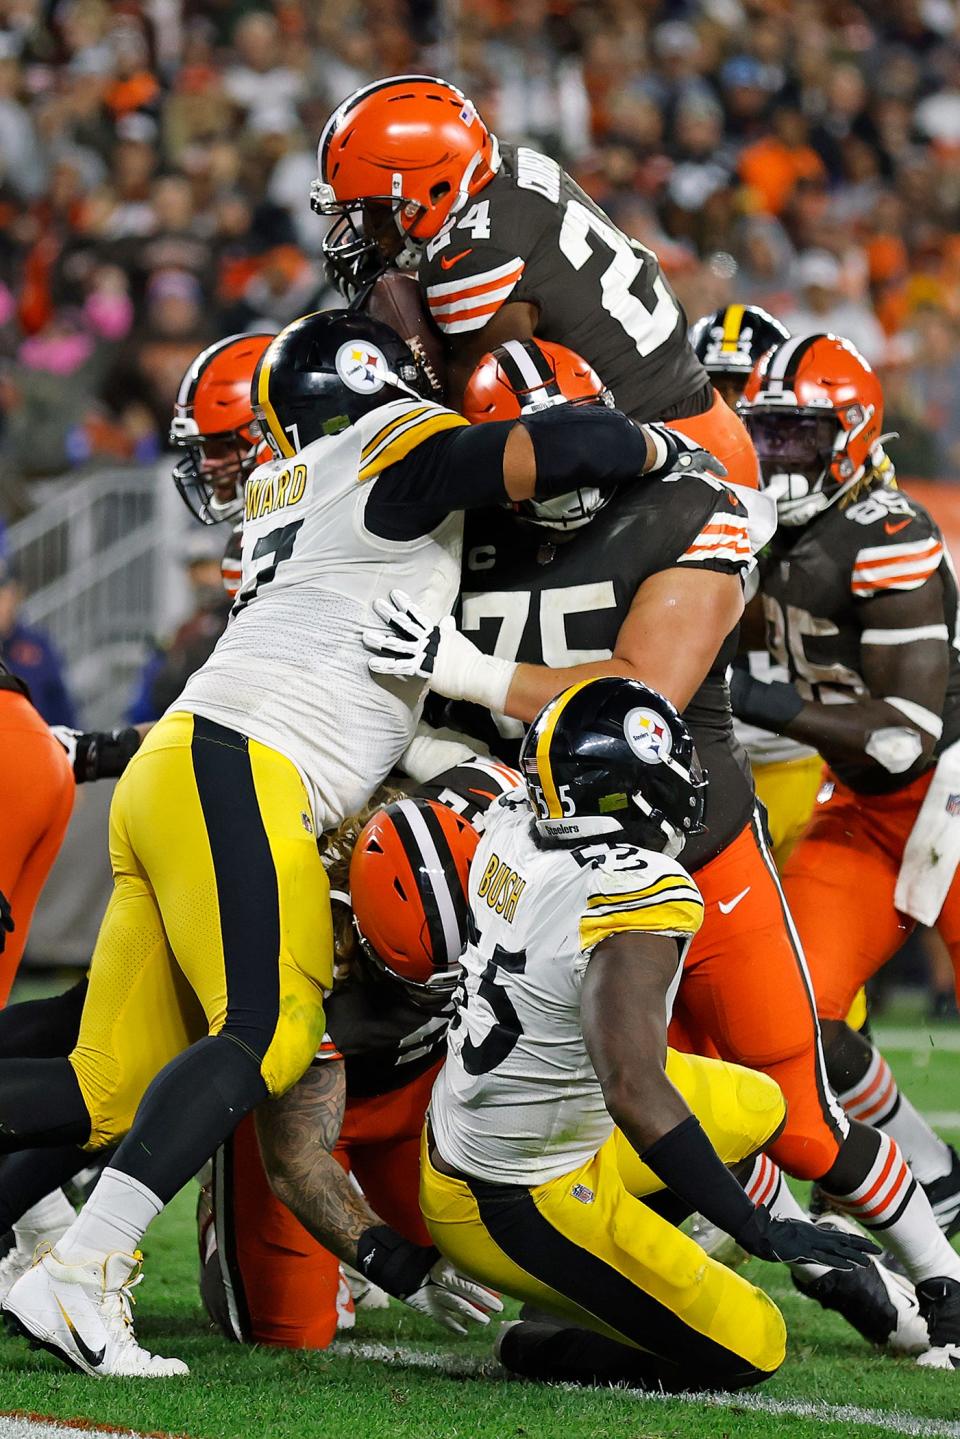 Browns running back Nick Chubb leaps into the end zone for a second-half touchdown against the Steelers in Cleveland, Thursday, Sept. 22, 2022.